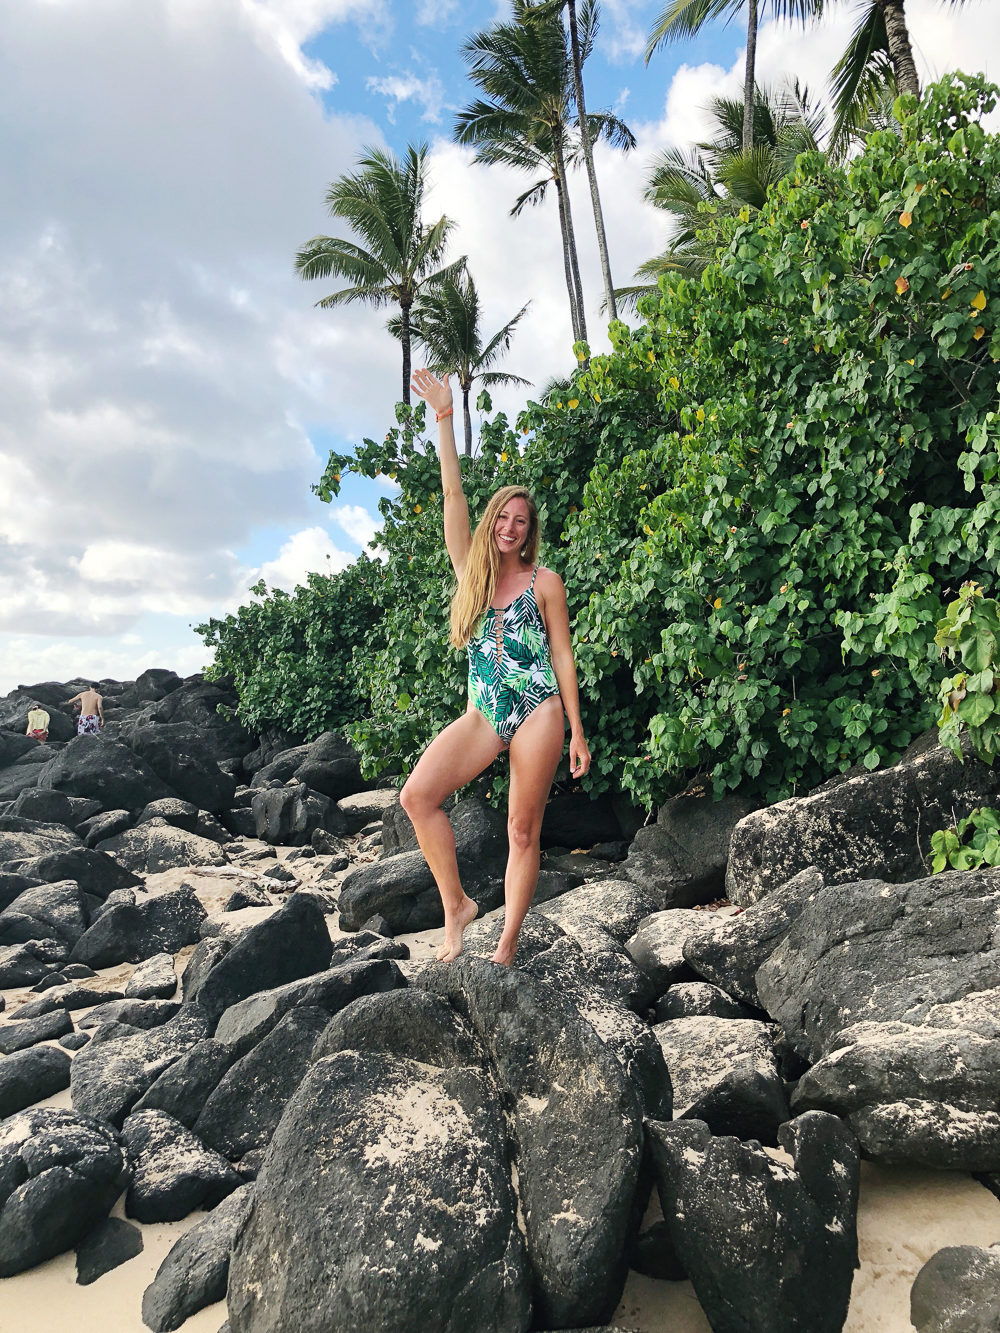 One Piece Swimsuits That Are Fun and Flattering | Sunshine Style, Wearing a Target One Piece Swimsuit on the North Shore in Oahu, Hawaiii